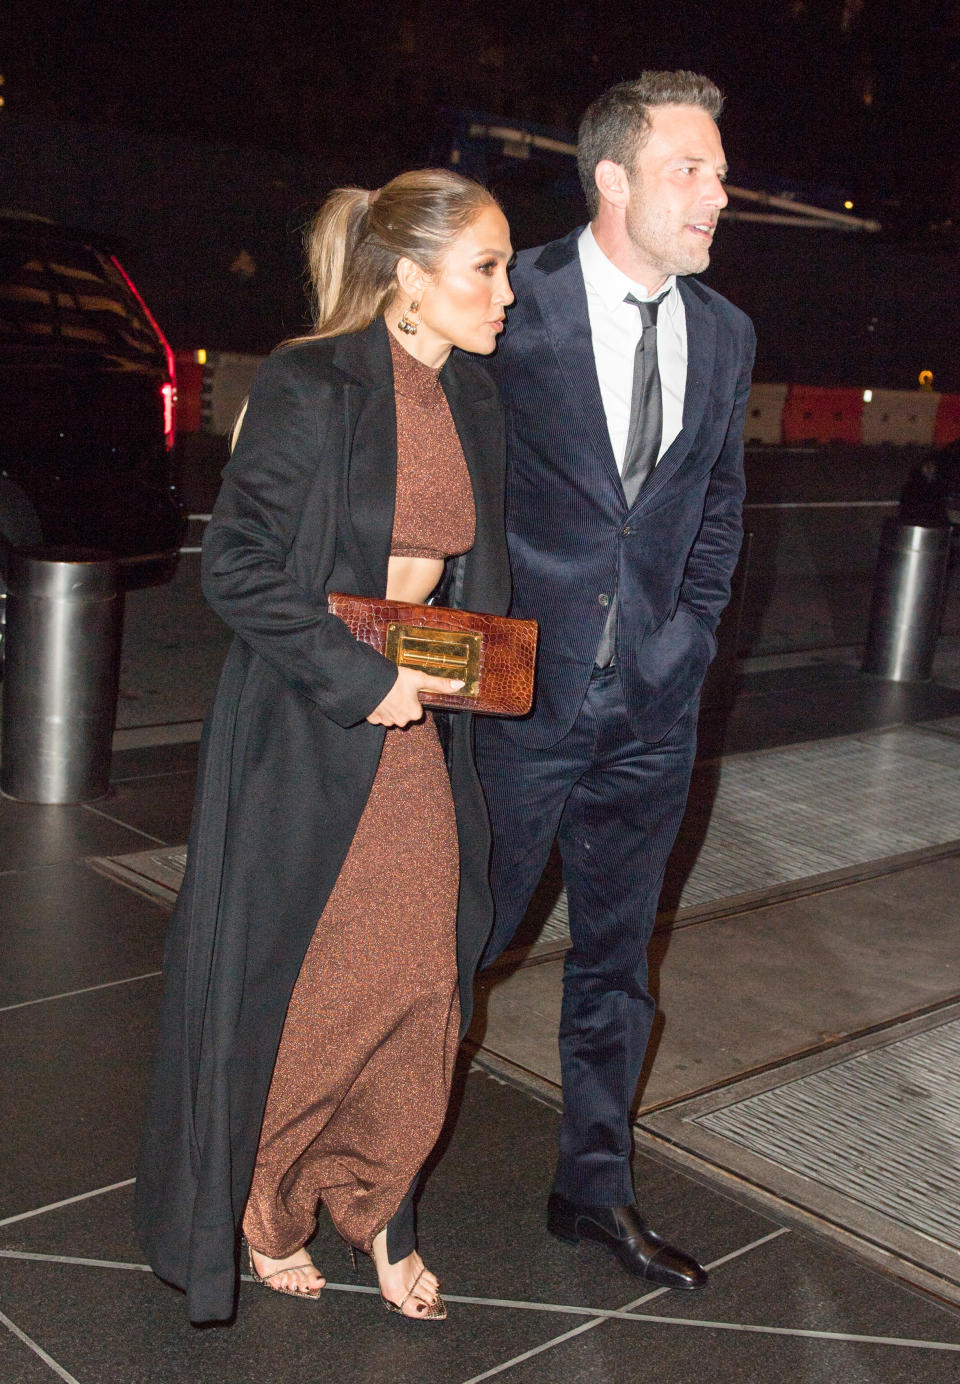 Jennifer Lopez and Ben Affleck leave the afterparty for “The Last Duel” at the Bowery Hotel in New York City. - Credit: BeautifulSignatureIG / SplashNews.com